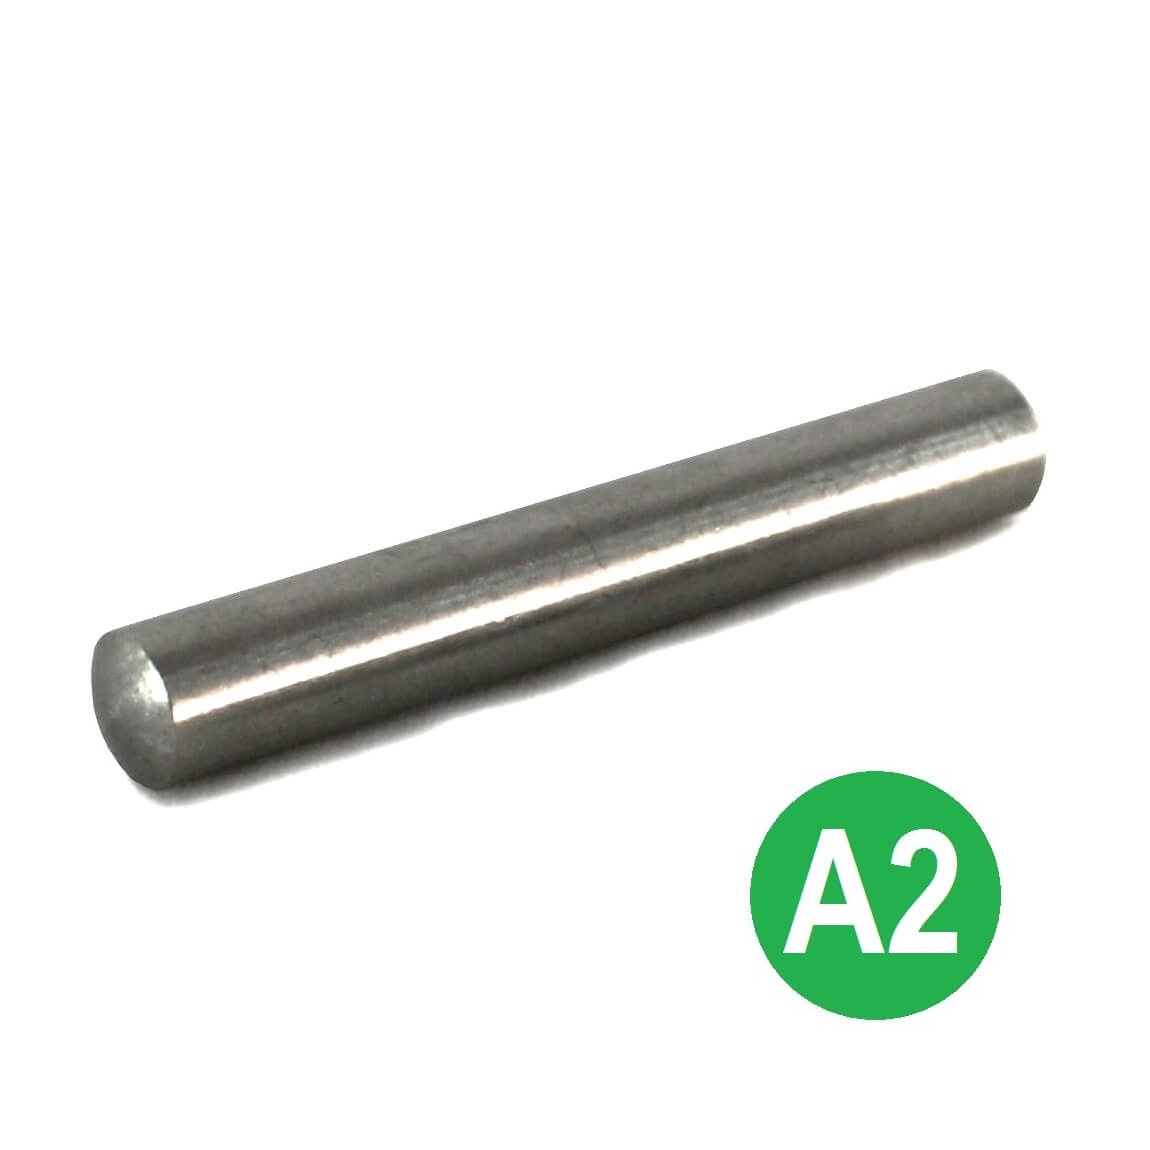 5mm Dia x 24mm A2 Stainless Dowel Pins DIN 7